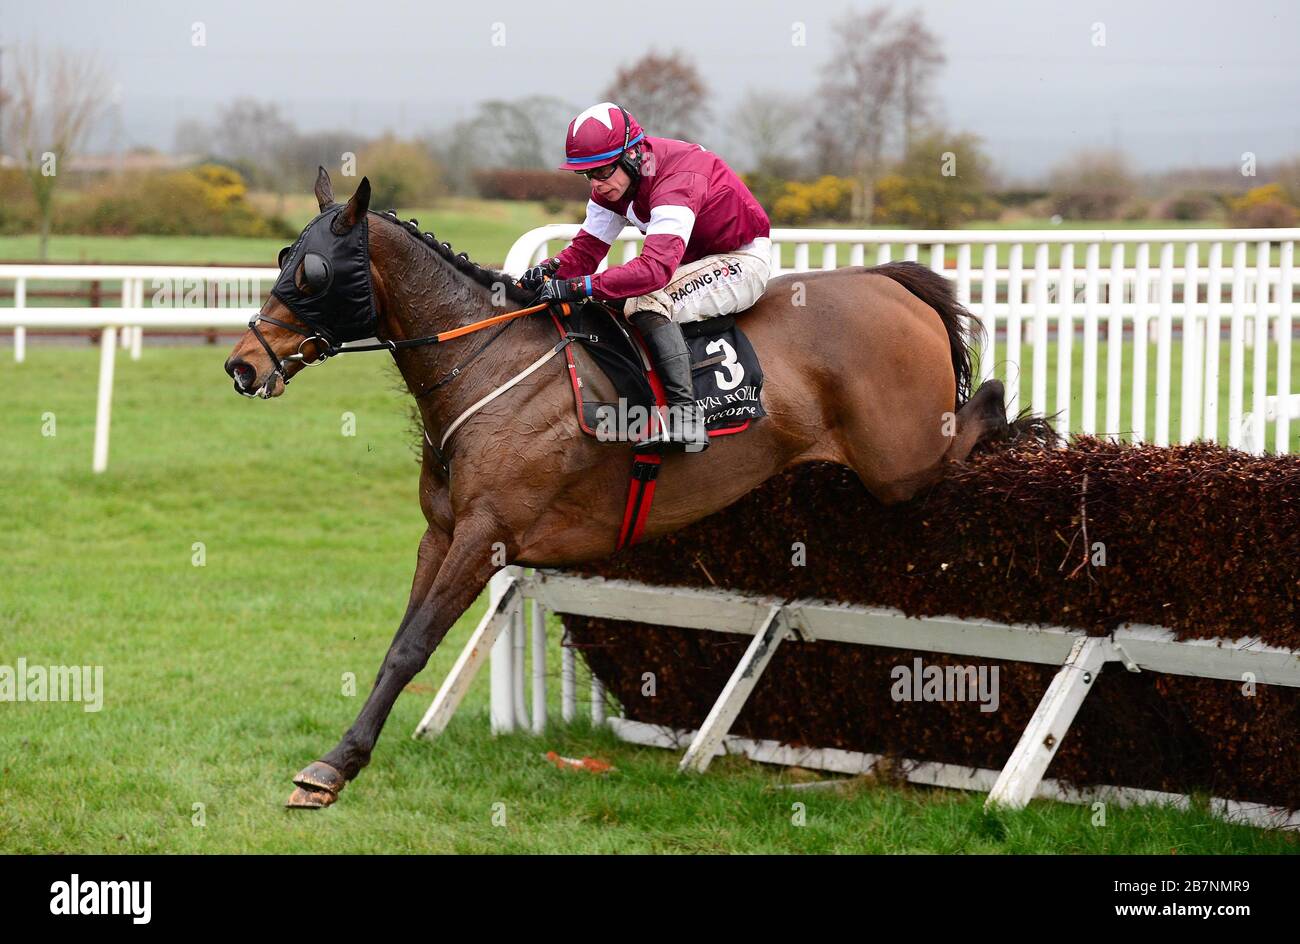 Monbeg Notorious and Denis O'Regan clear a fence on the way to winning the Racing TV Chase during today's meet at Down Royal Racecourse, Lisburn, which is being held behind closed doors because of the Coronavirus. Stock Photo